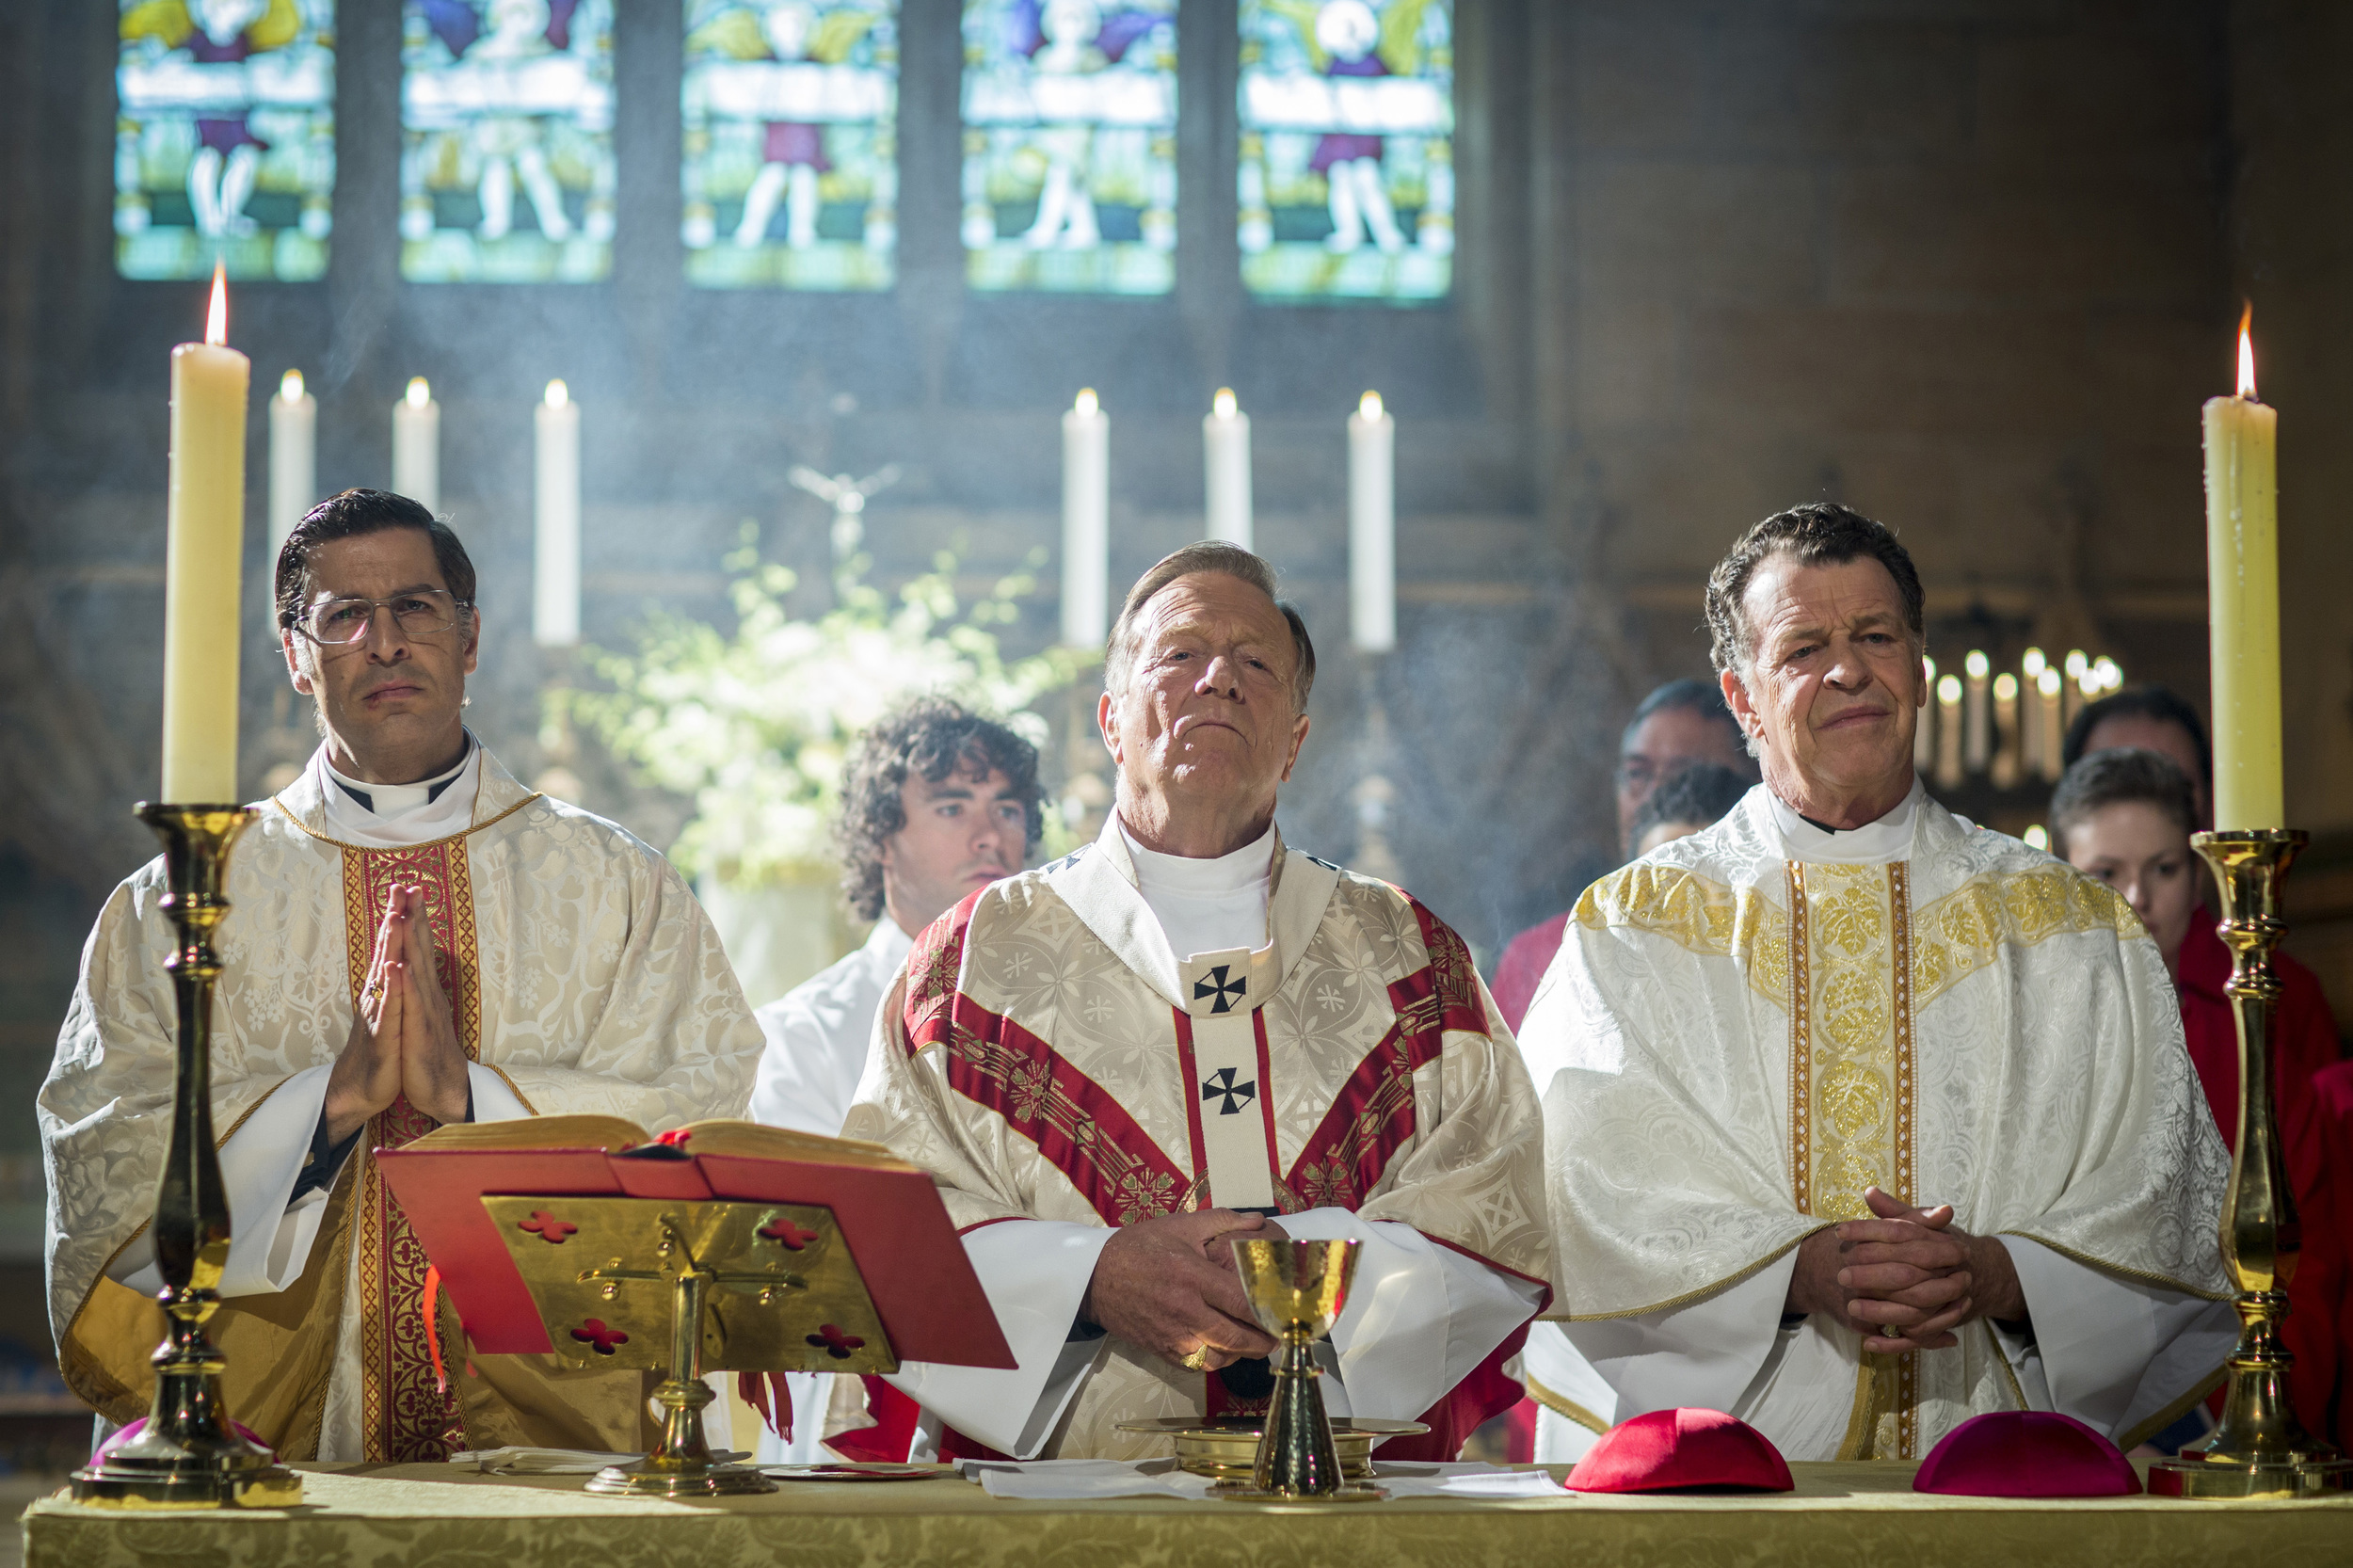   Don Hany, Jack Thompson and John Noble, men of the cloth in Devils Playground   image - supplied/Foxtel  